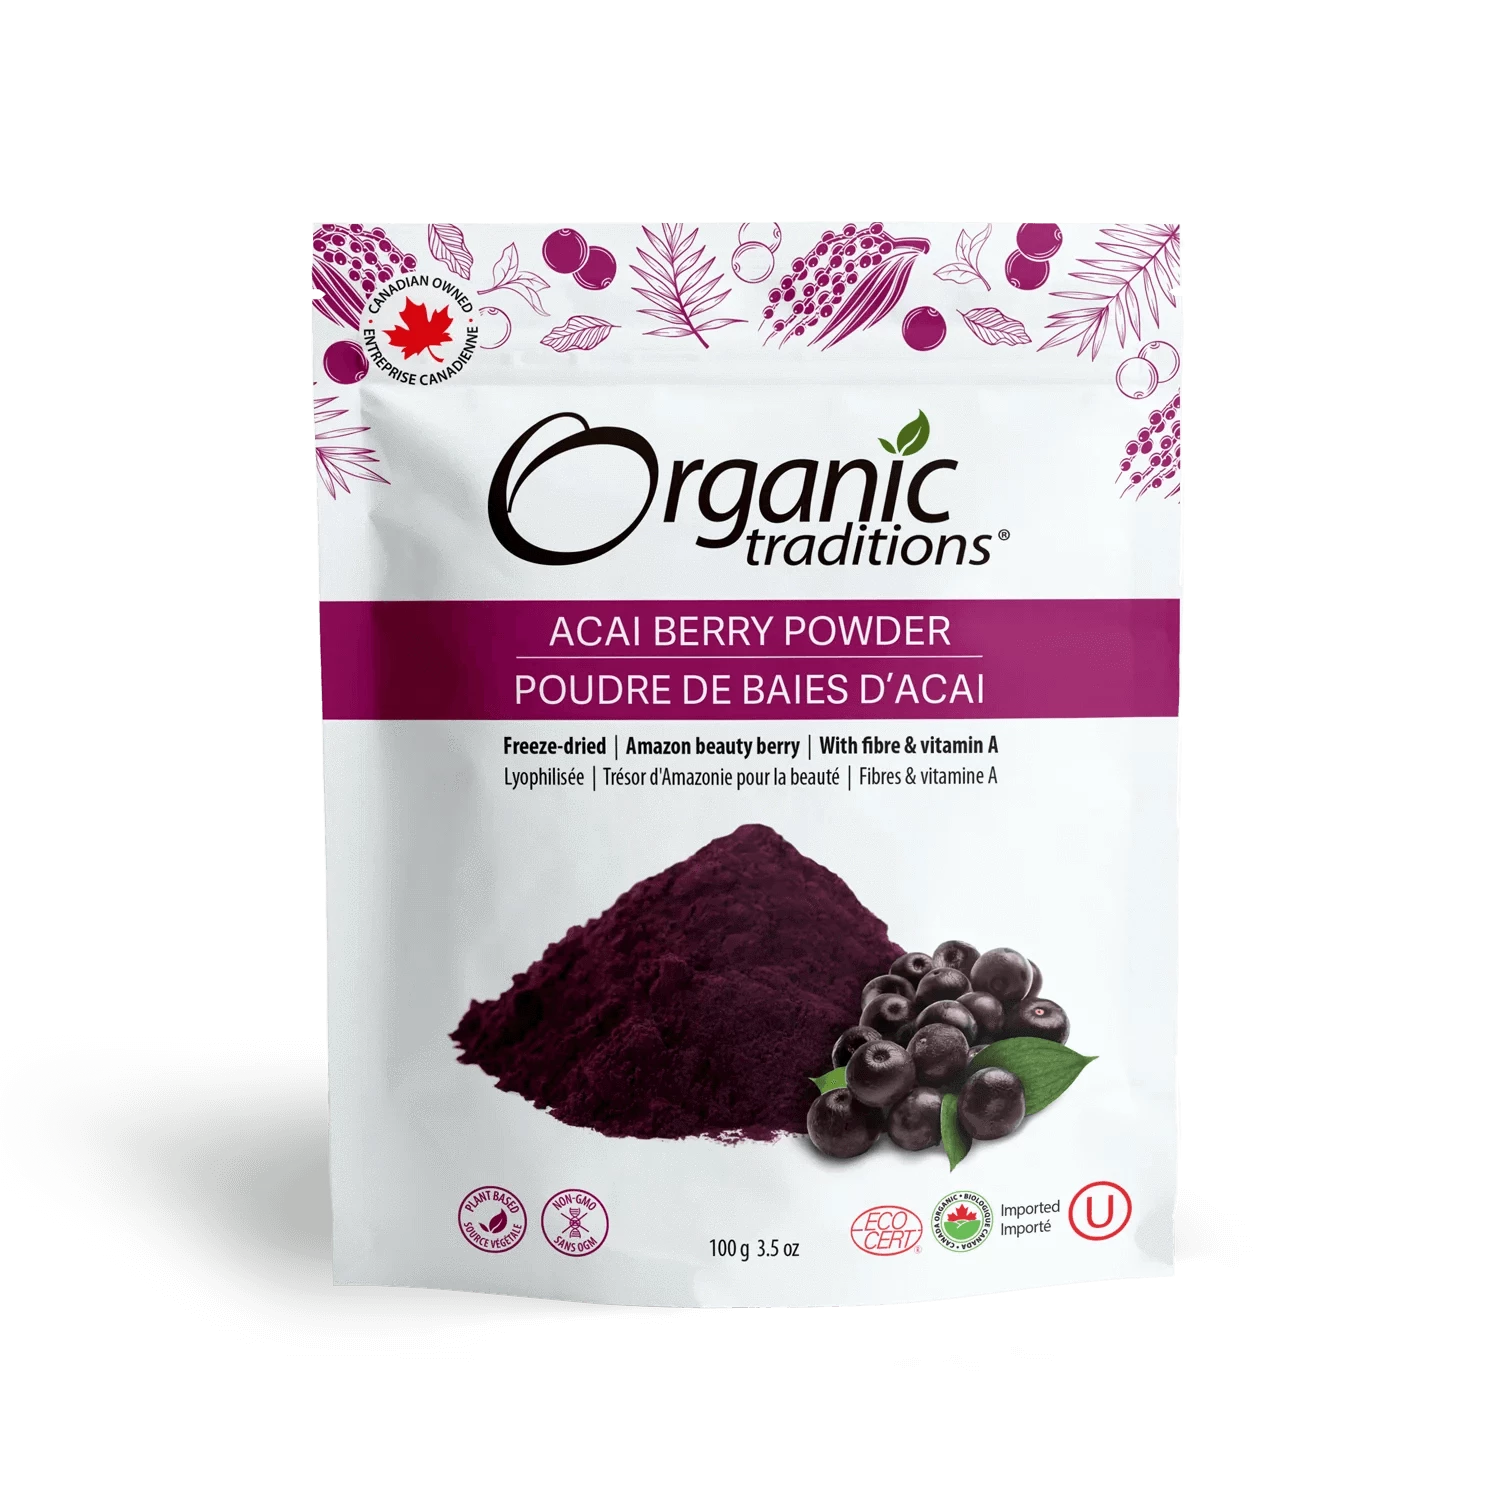 Organic acai berries powder, a superfood rich in antioxidants and nutrients, perfect for smoothies and bowls.